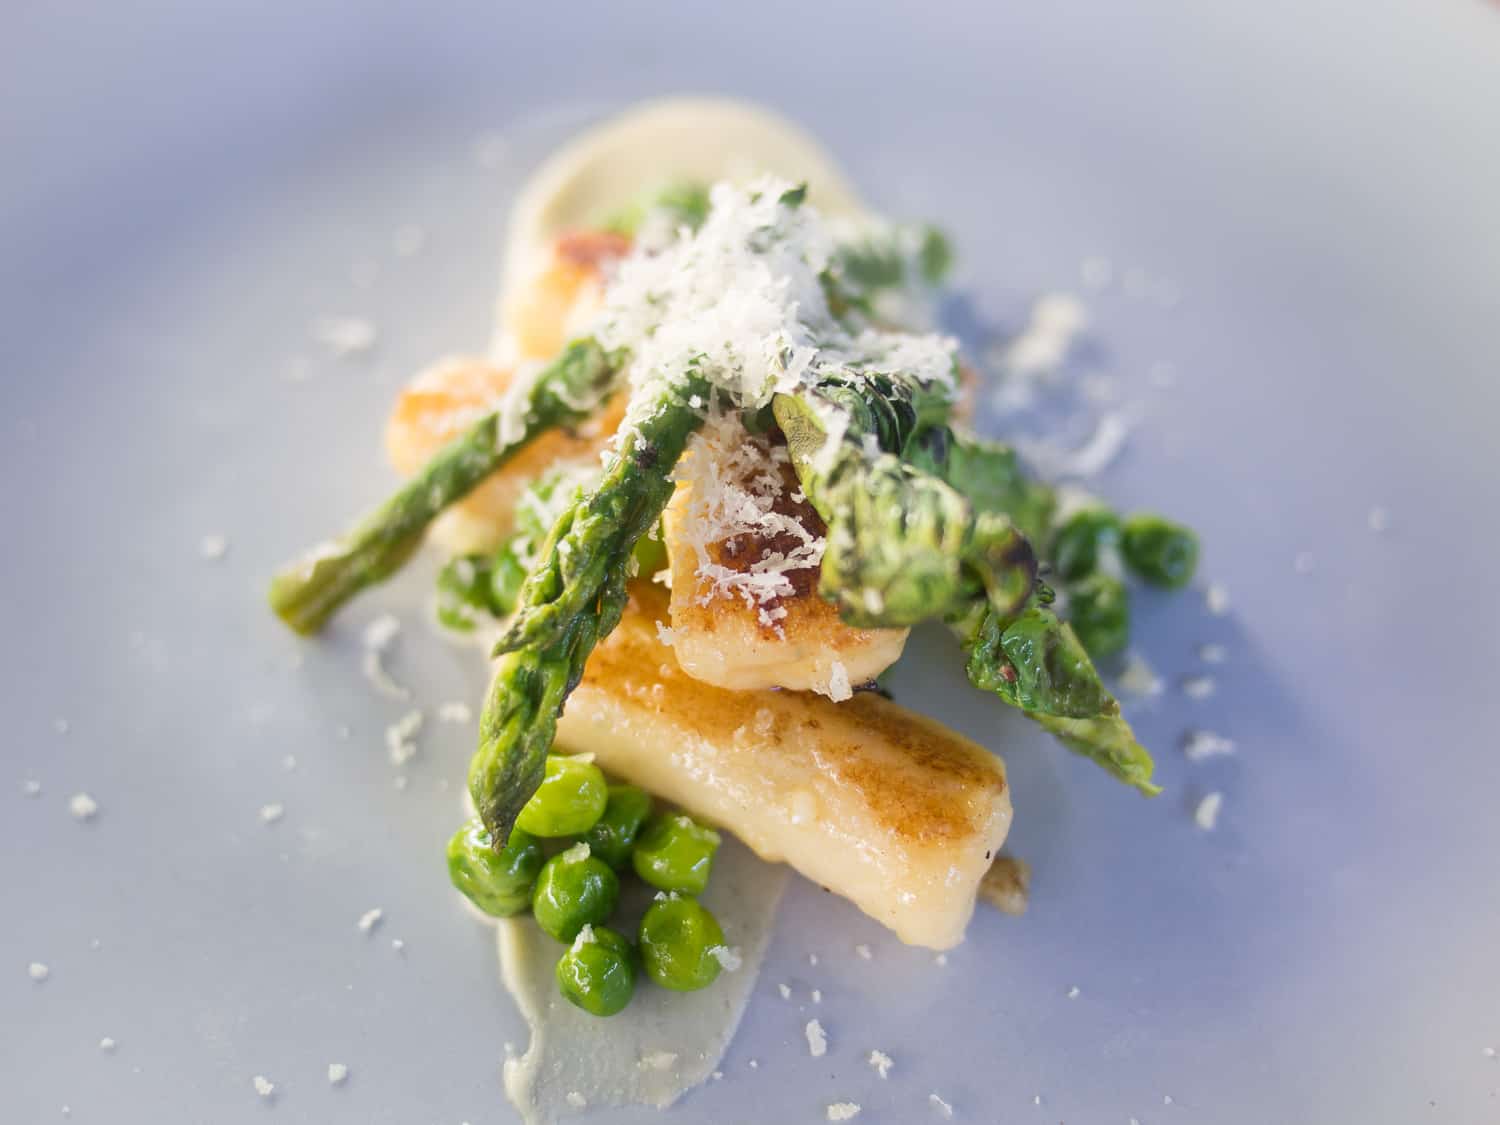 Gnocchi with peas and asparagus from La Mouette's vegetarian tasting menu in Sea Point, Cape Town